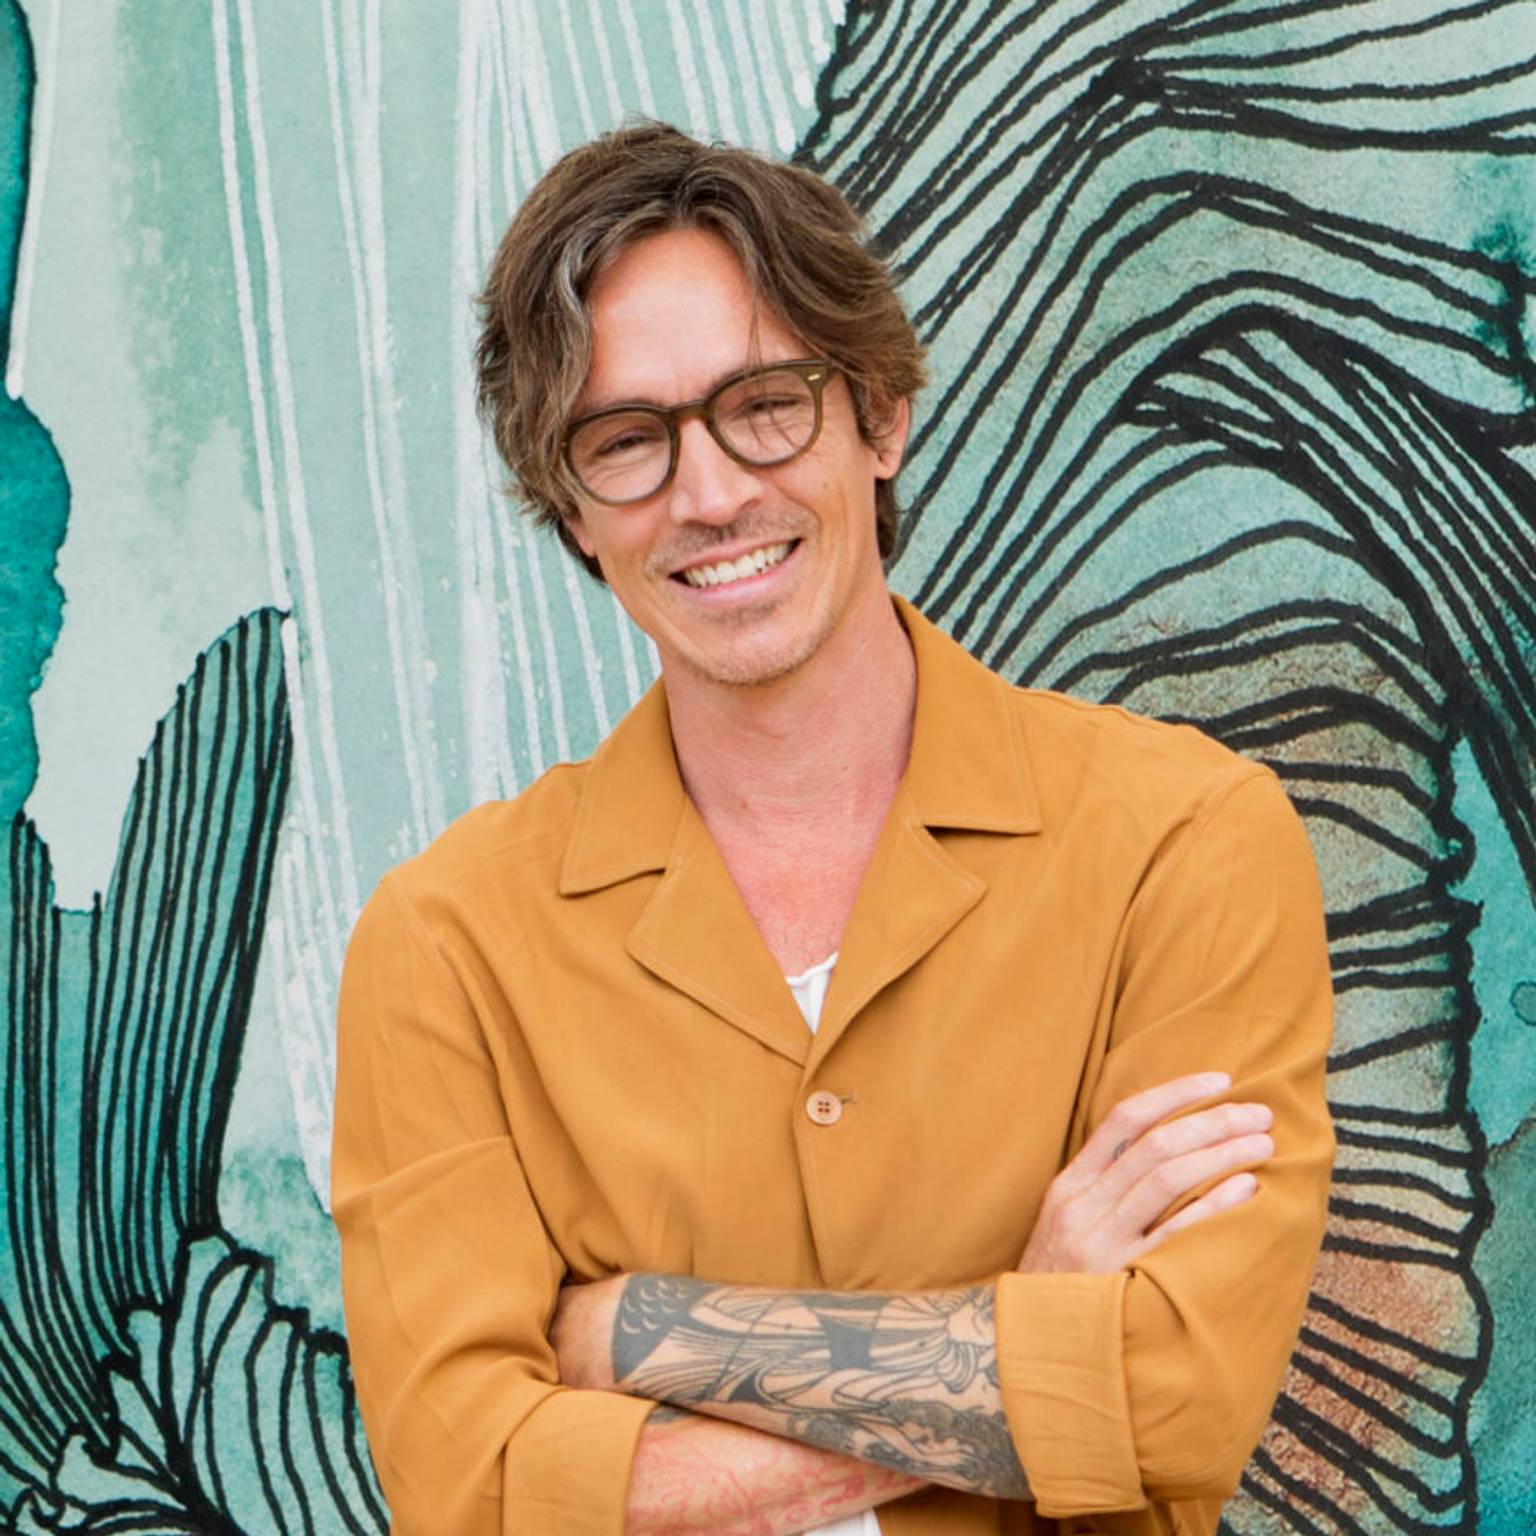 Pictured: Brandon Boyd - American singer, songwriter, and painter.